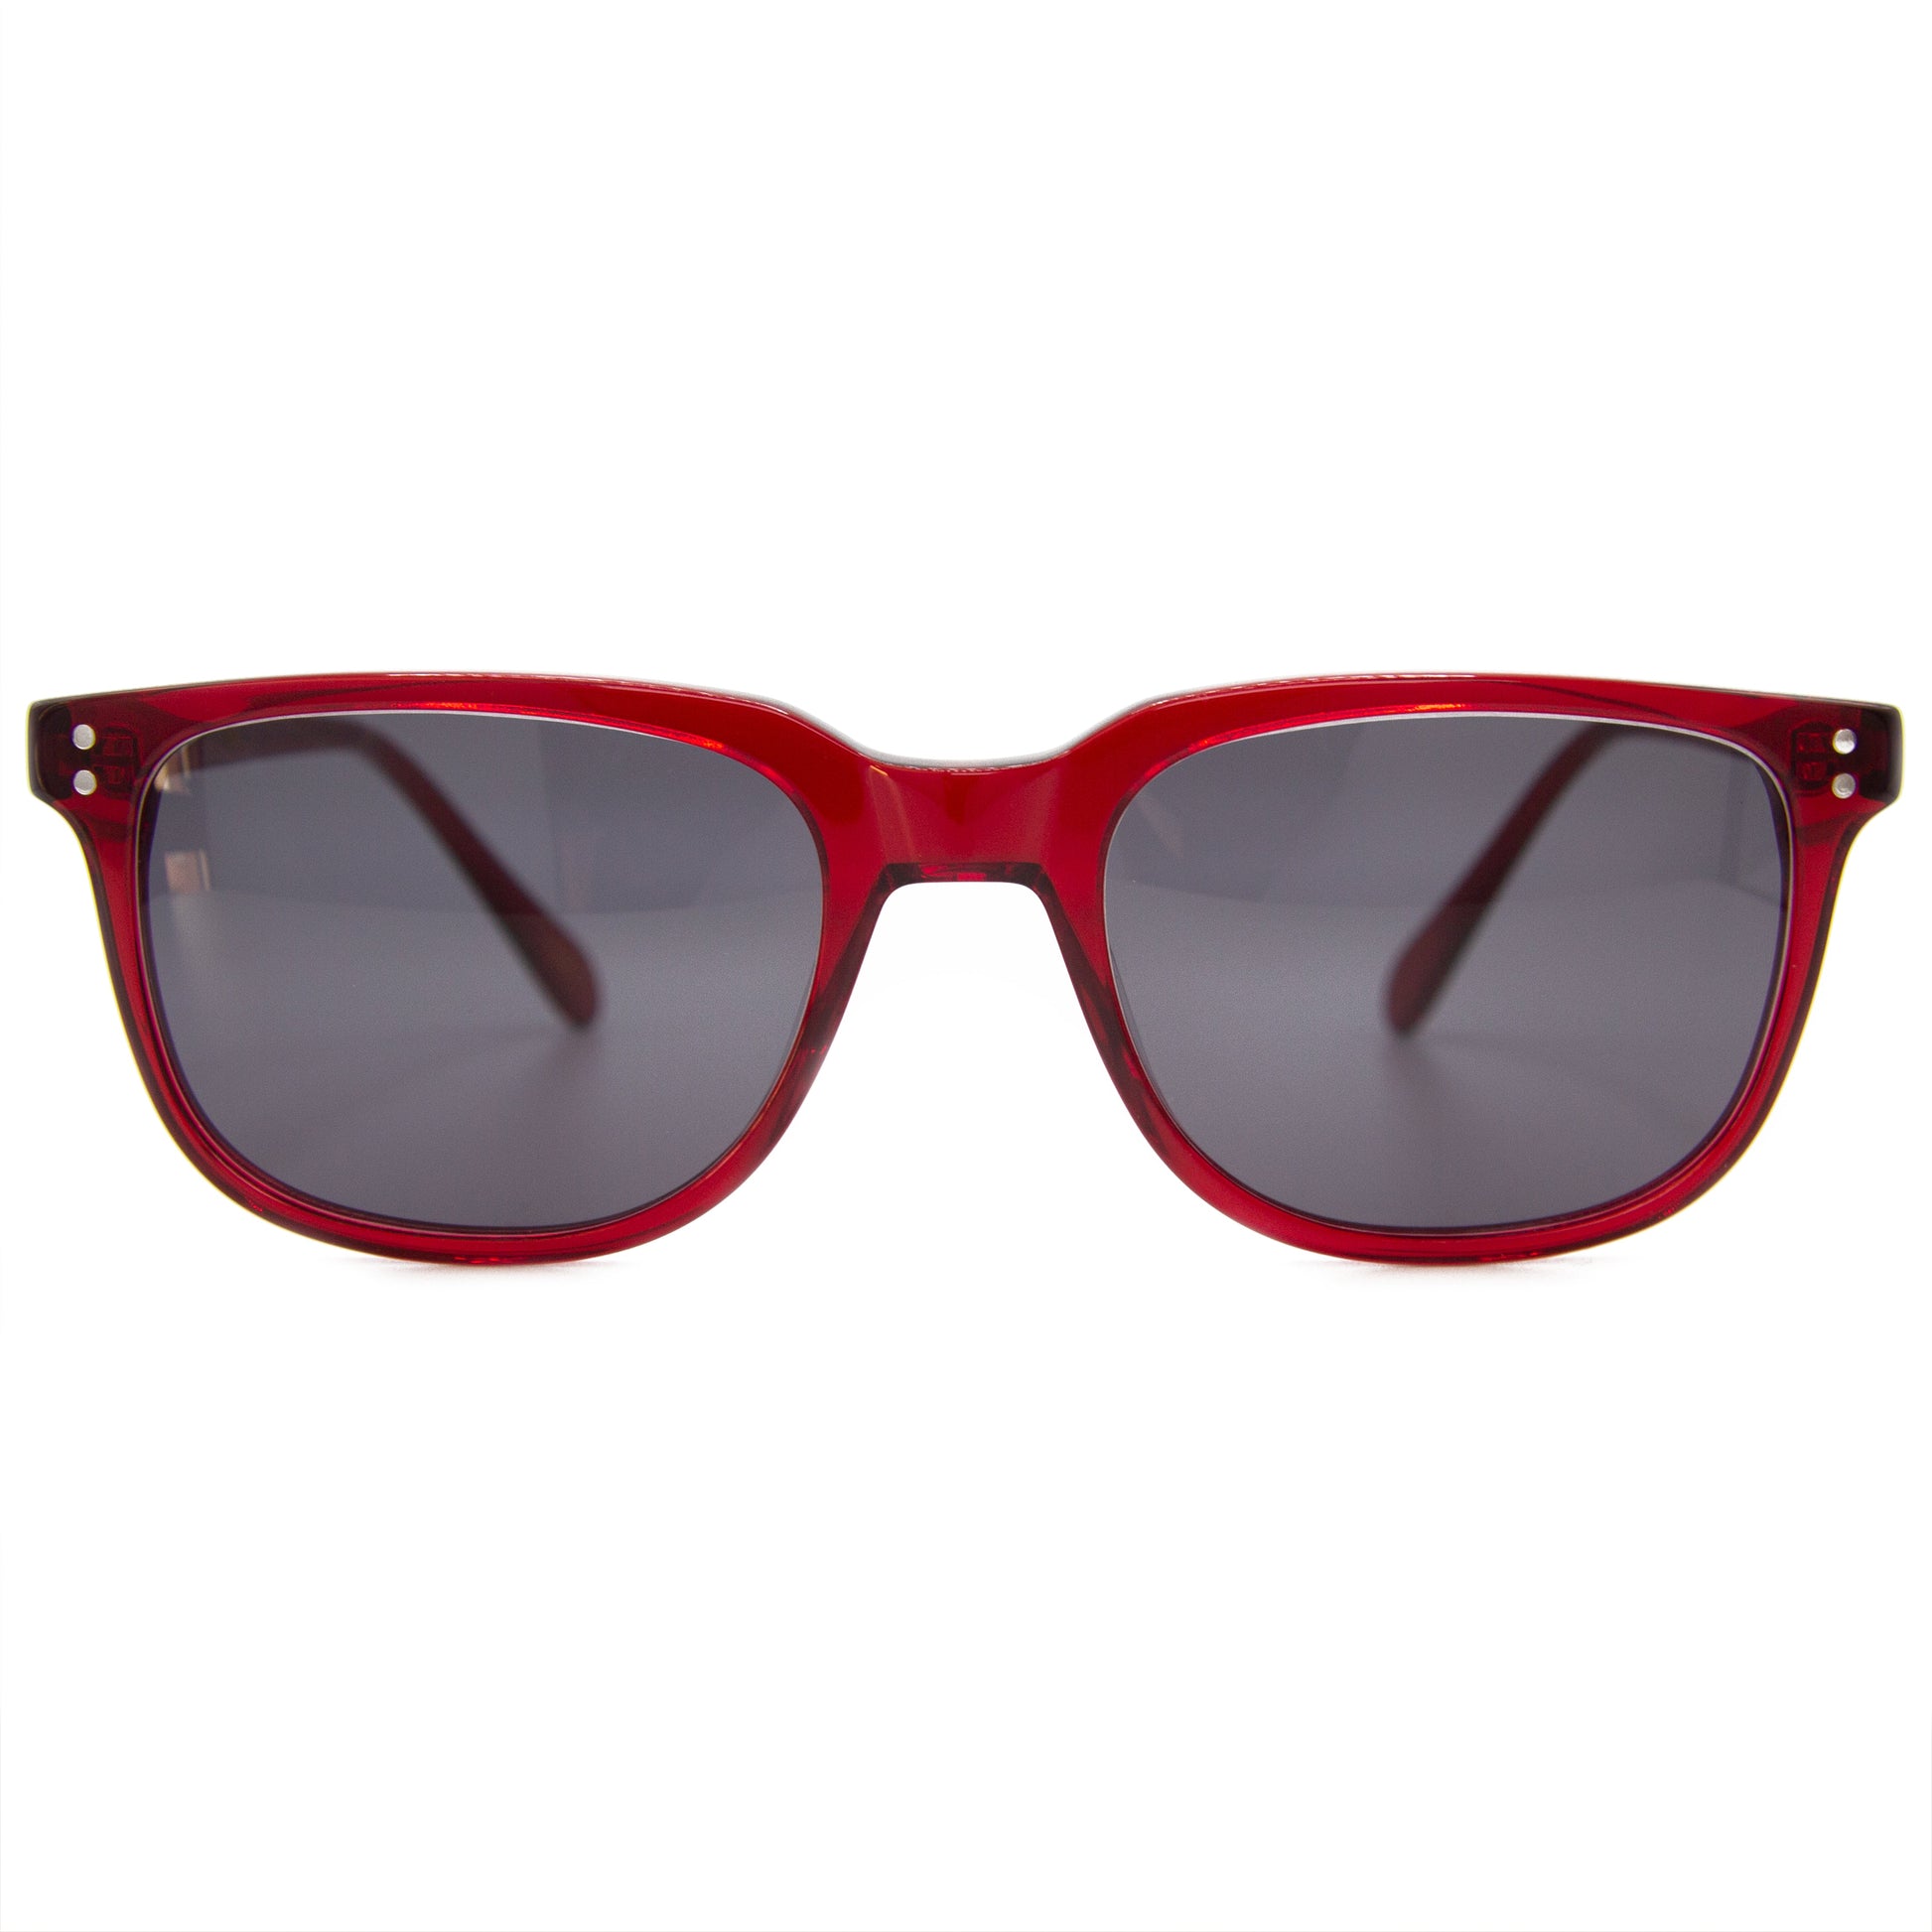 3 brothers - Theo - Red - Prescription Sunglasses 